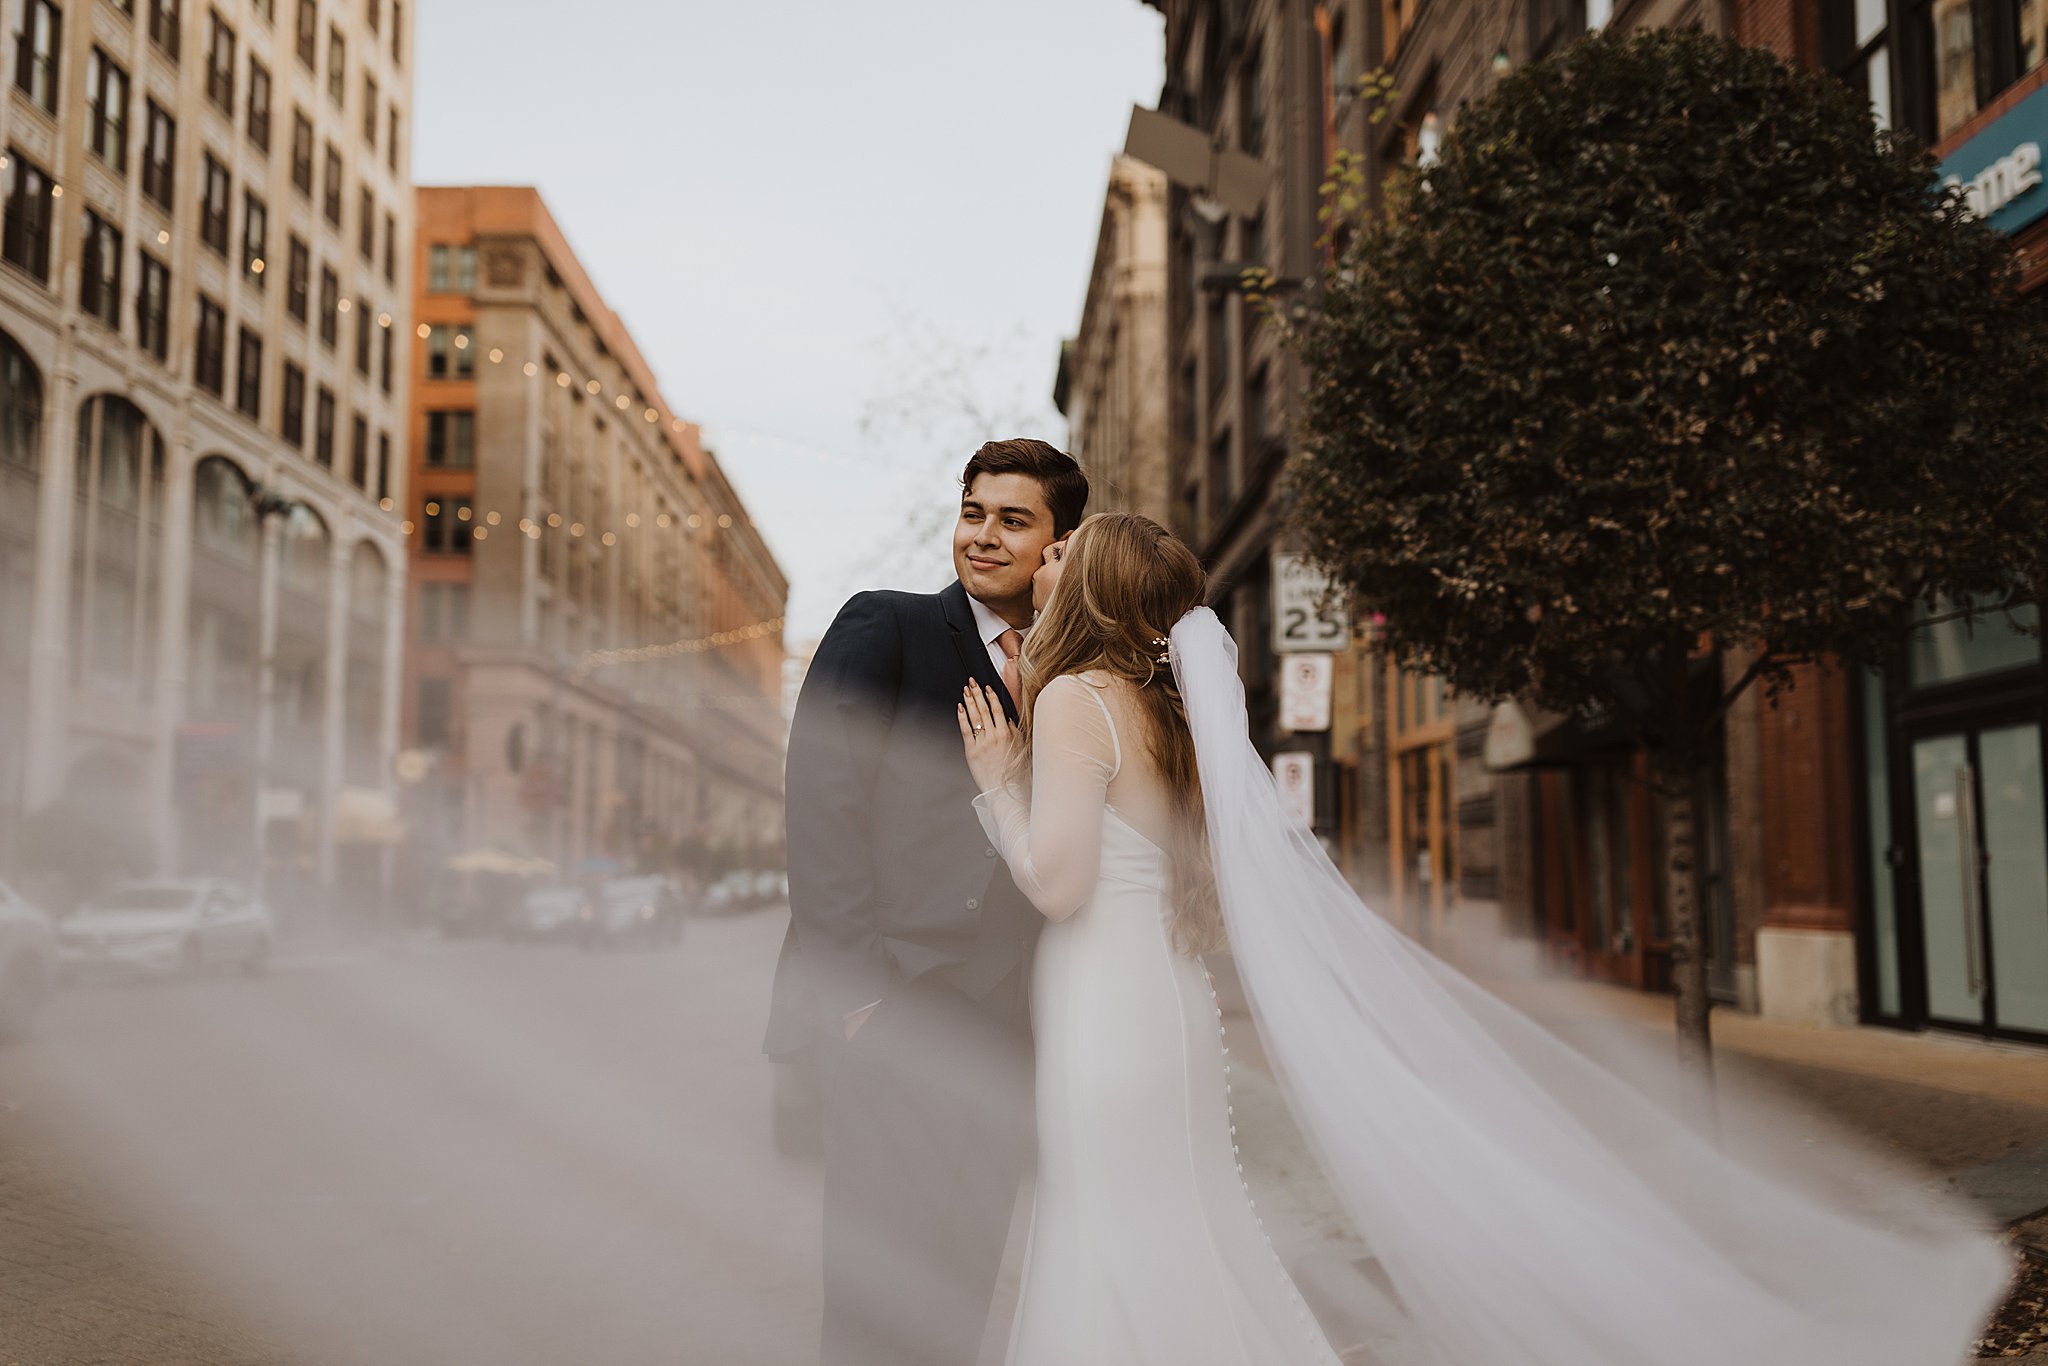 Downtown STL Bride and Groom Photos